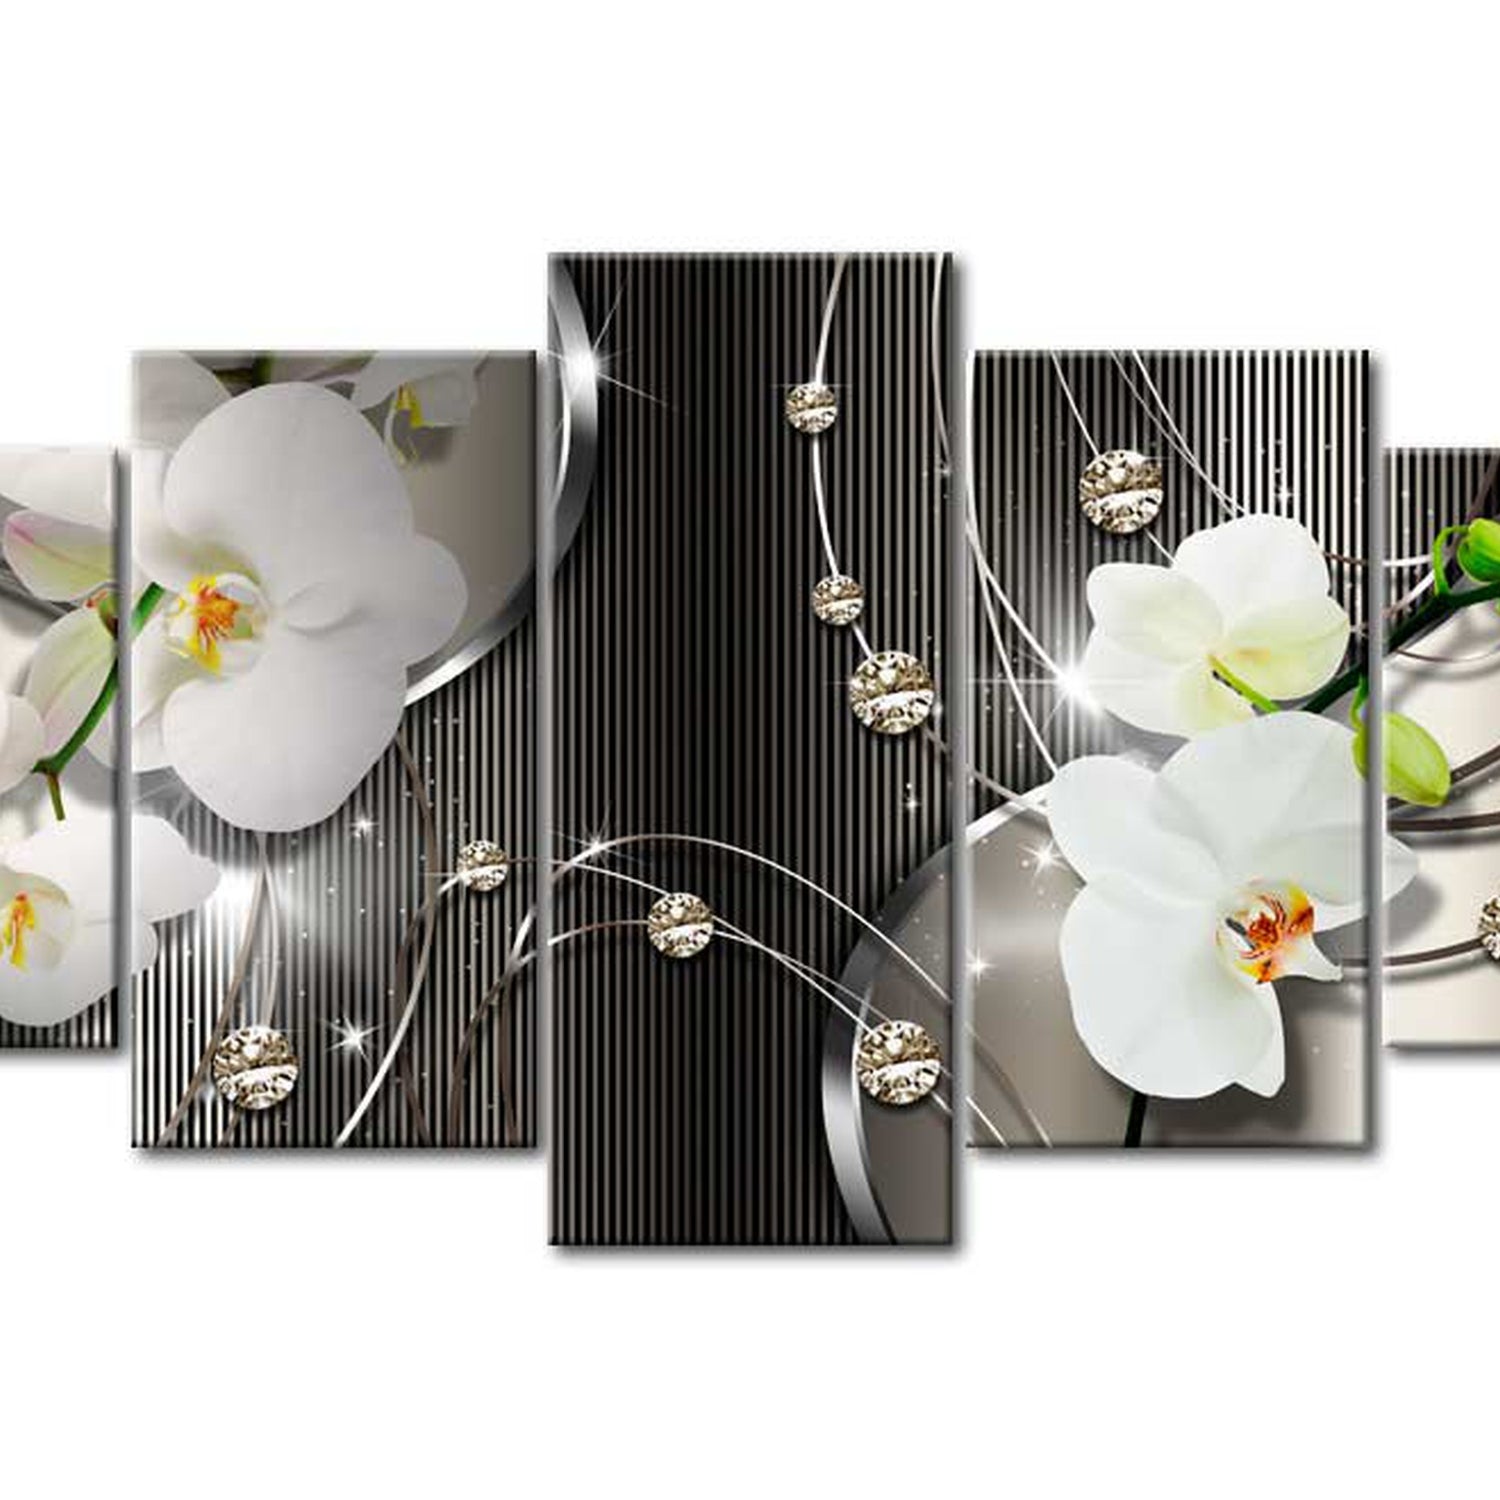 Glamour Canvas Wall Art - Orchid Sensation - 5 Pieces